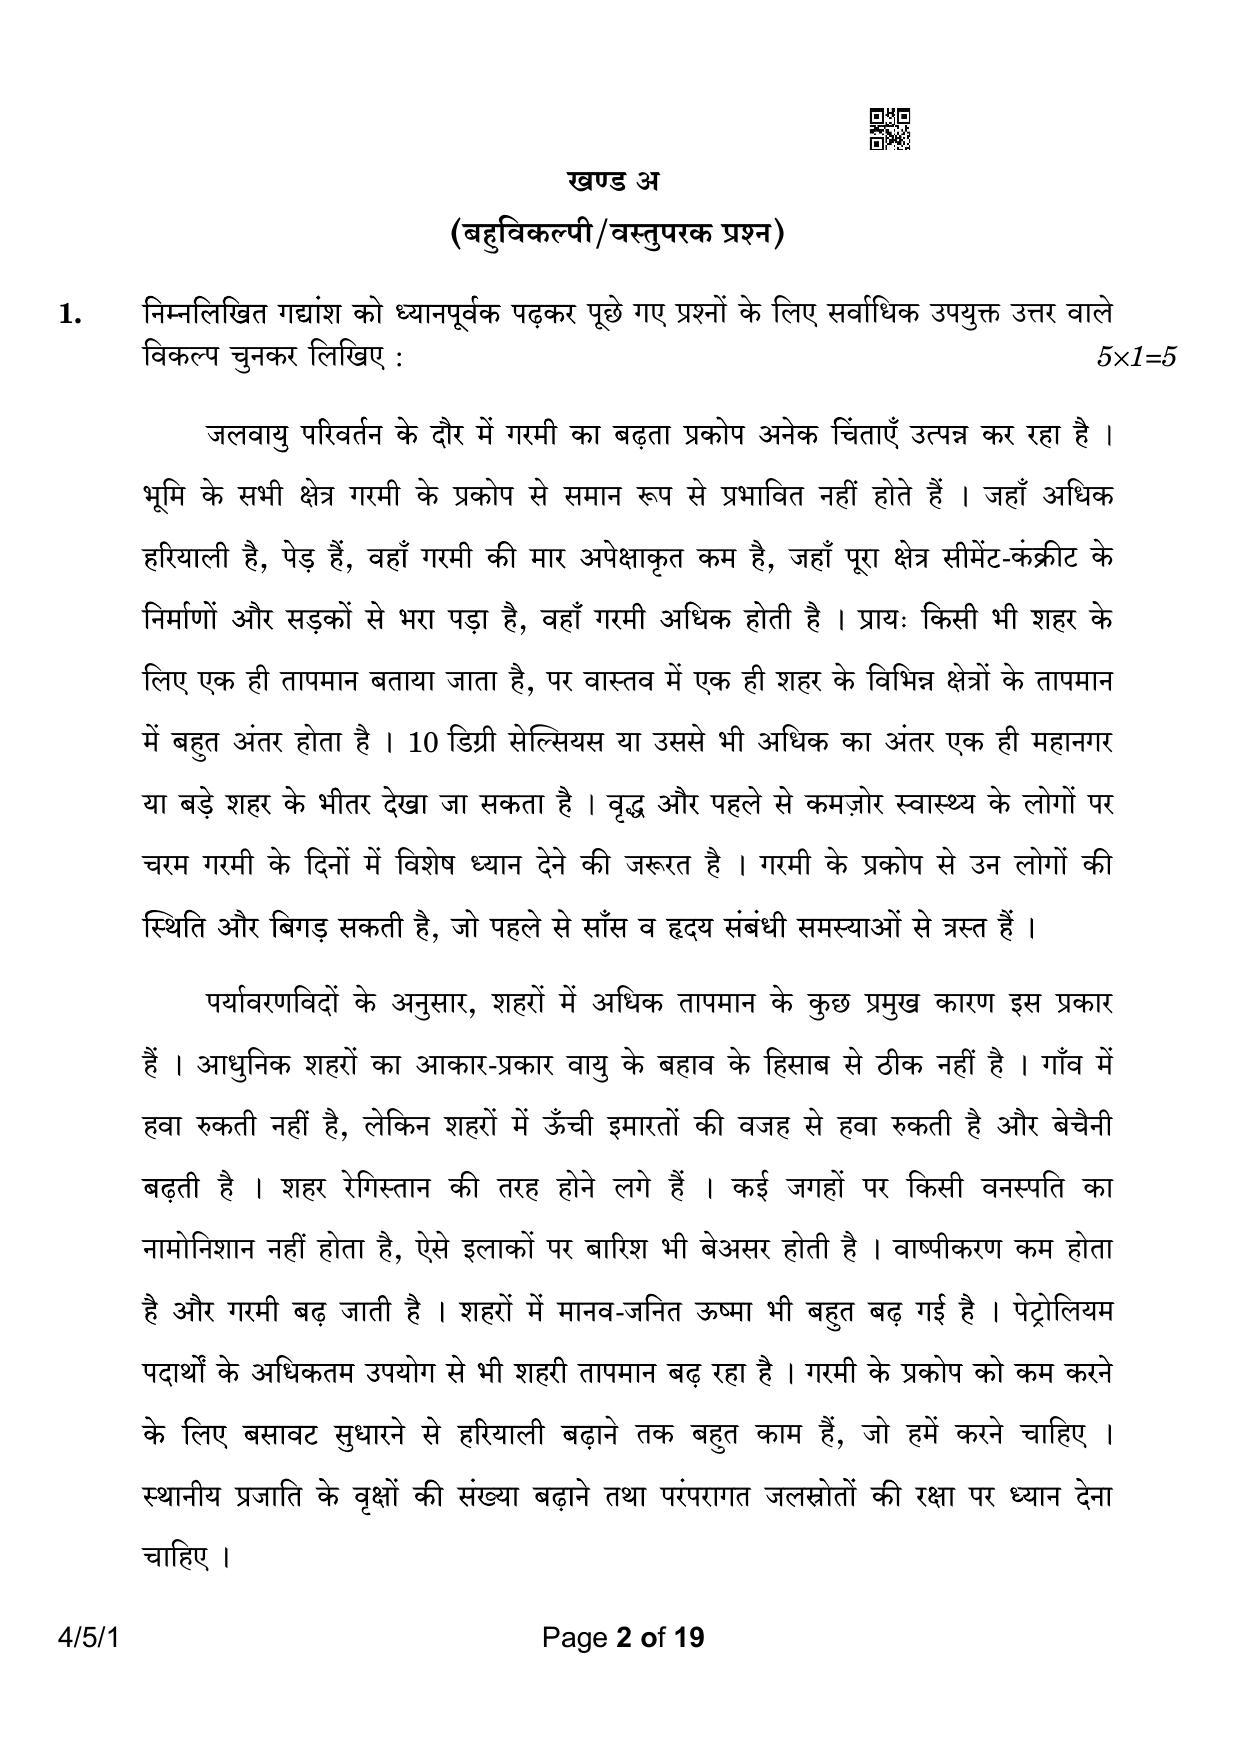 CBSE Class 10 4-5-1 Hindi B 2023 Question Paper - Page 2